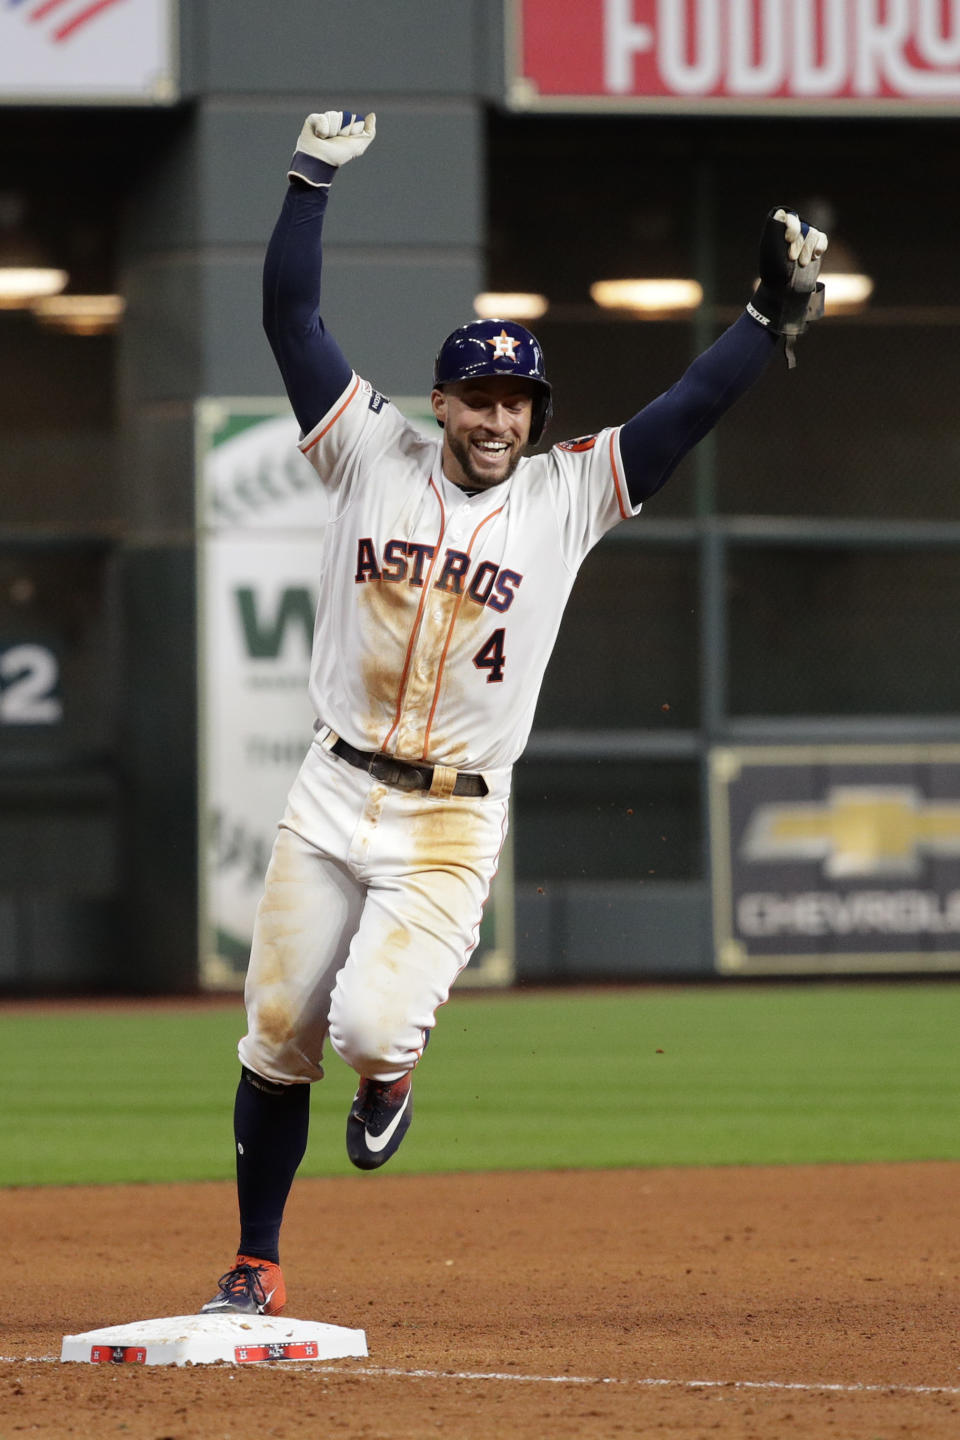 Houston Astros' George Springer celebrates after their win in Game 6 of baseball's American League Championship Series against the New York Yankees Saturday, Oct. 19, 2019, in Houston. The Astros won 6-4 to win the series 4-2. (AP Photo/Eric Gay)